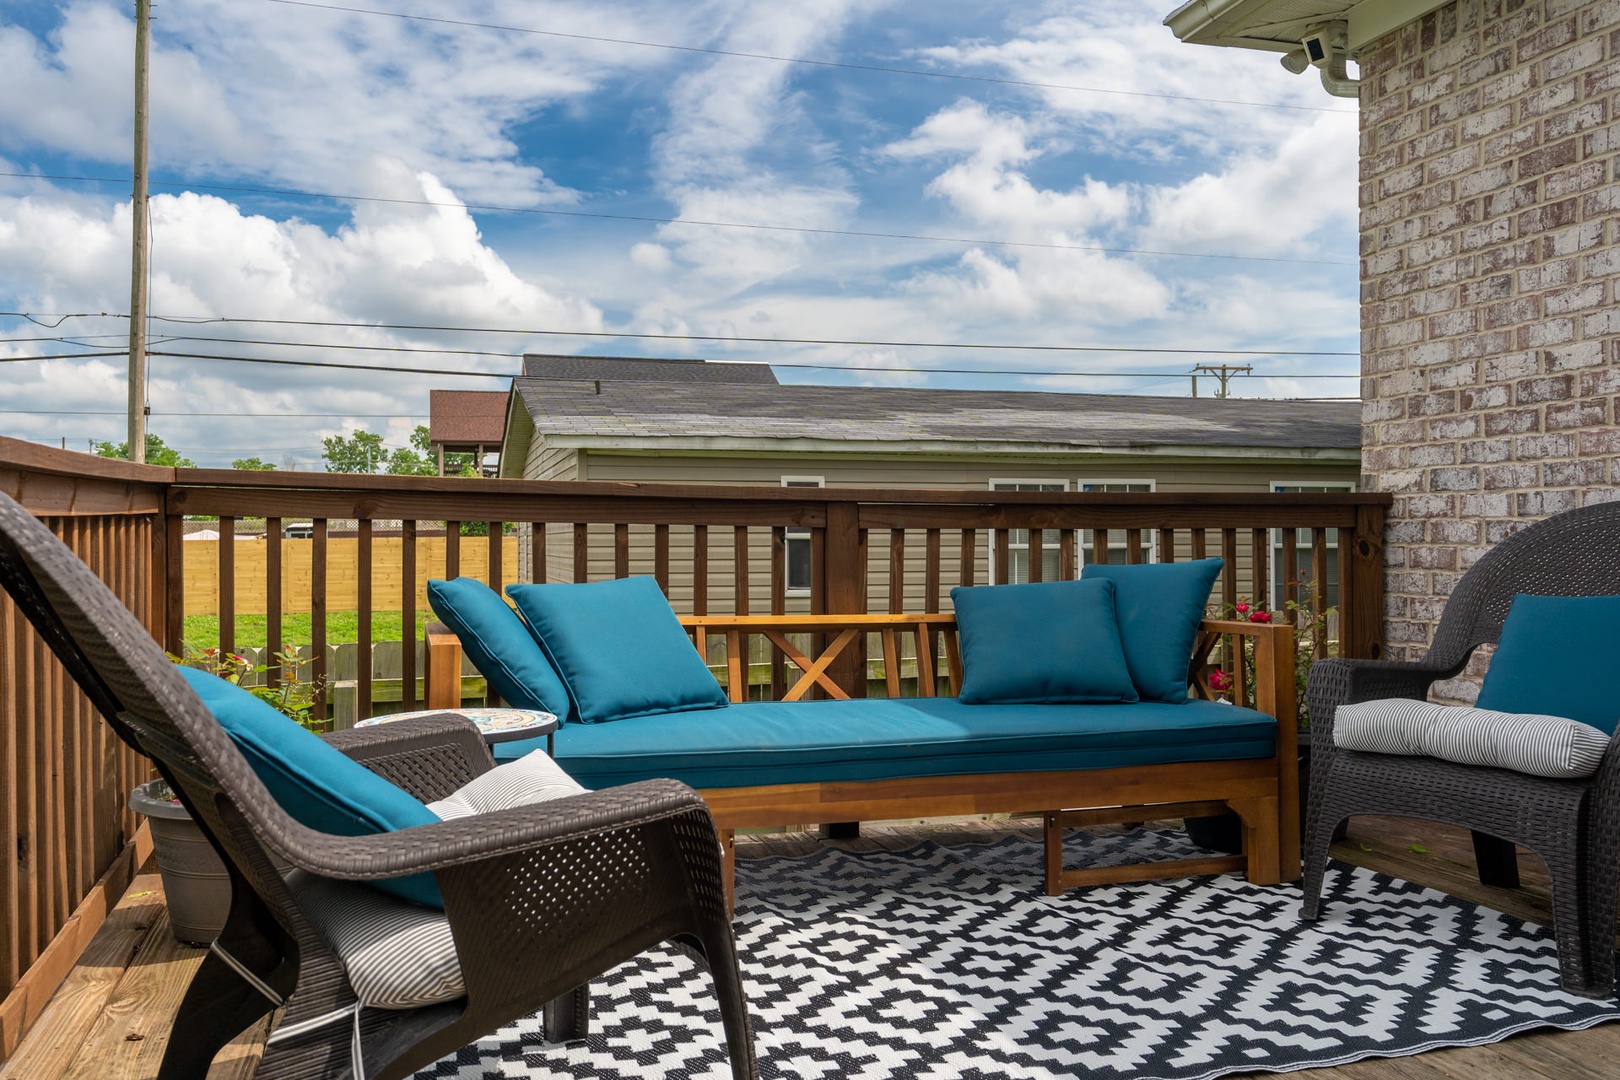 Patio with outdoor seating and gas BBQ grill